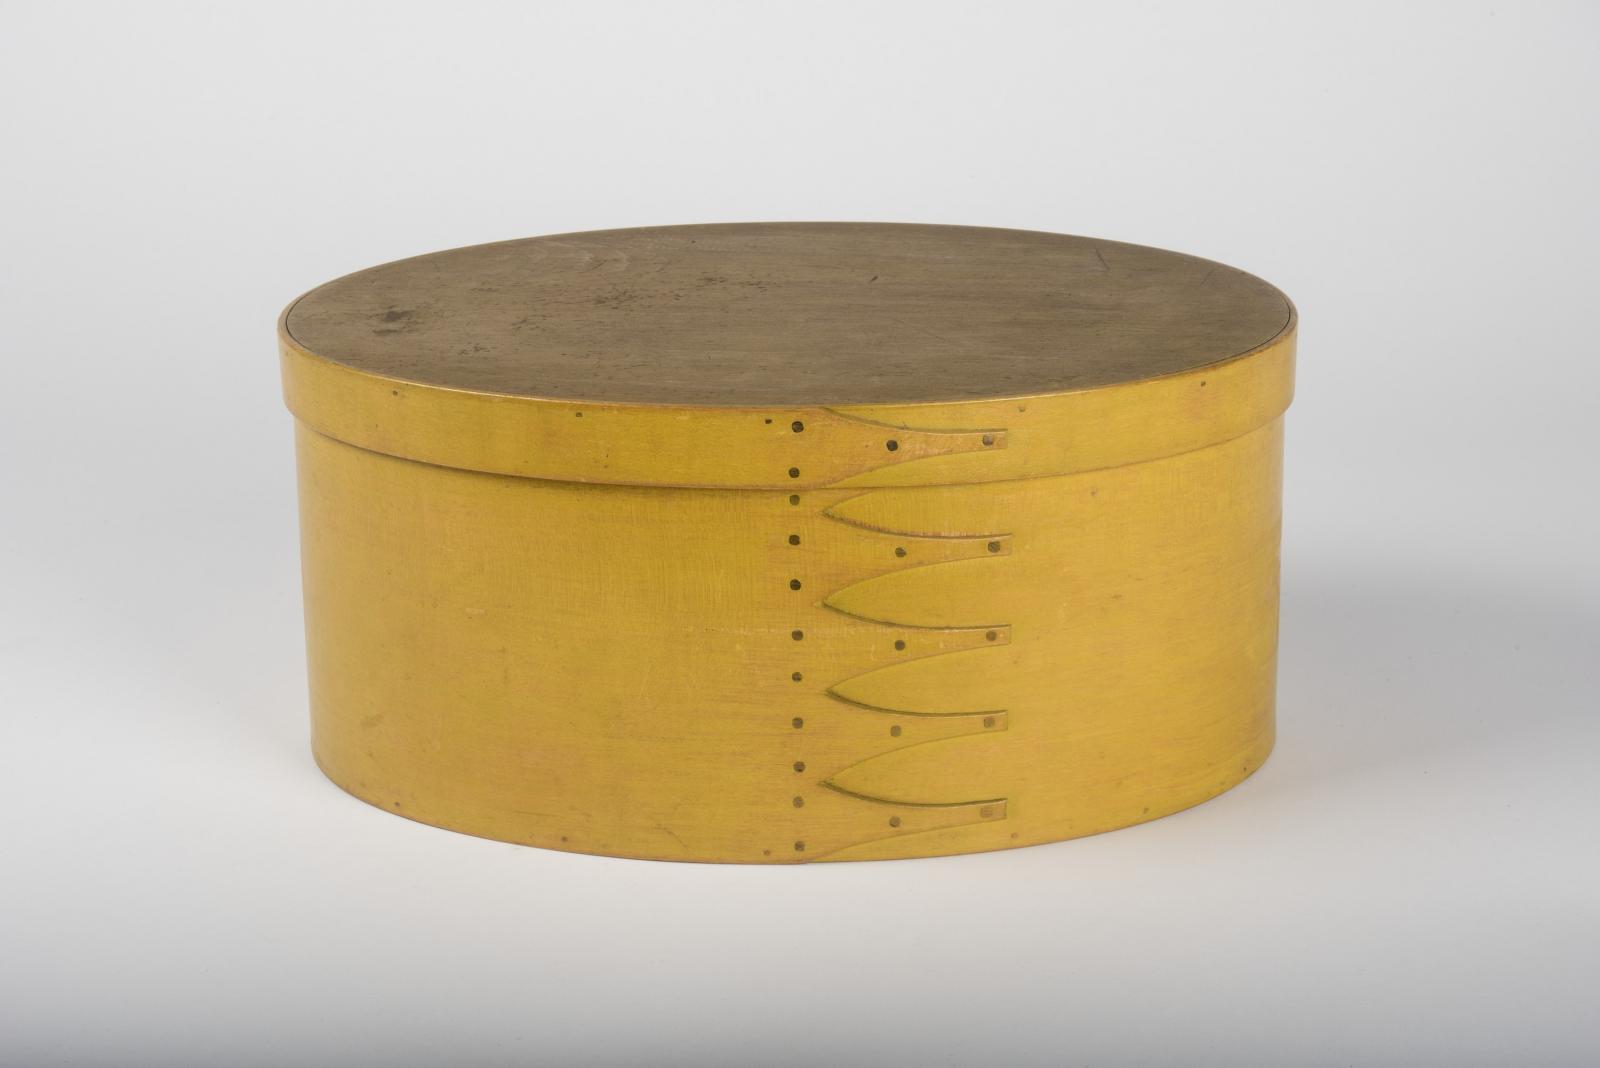 Large, oval, pine and maple box, smooth and plain with six fingers forming a side seam and a chrome yellow finish.